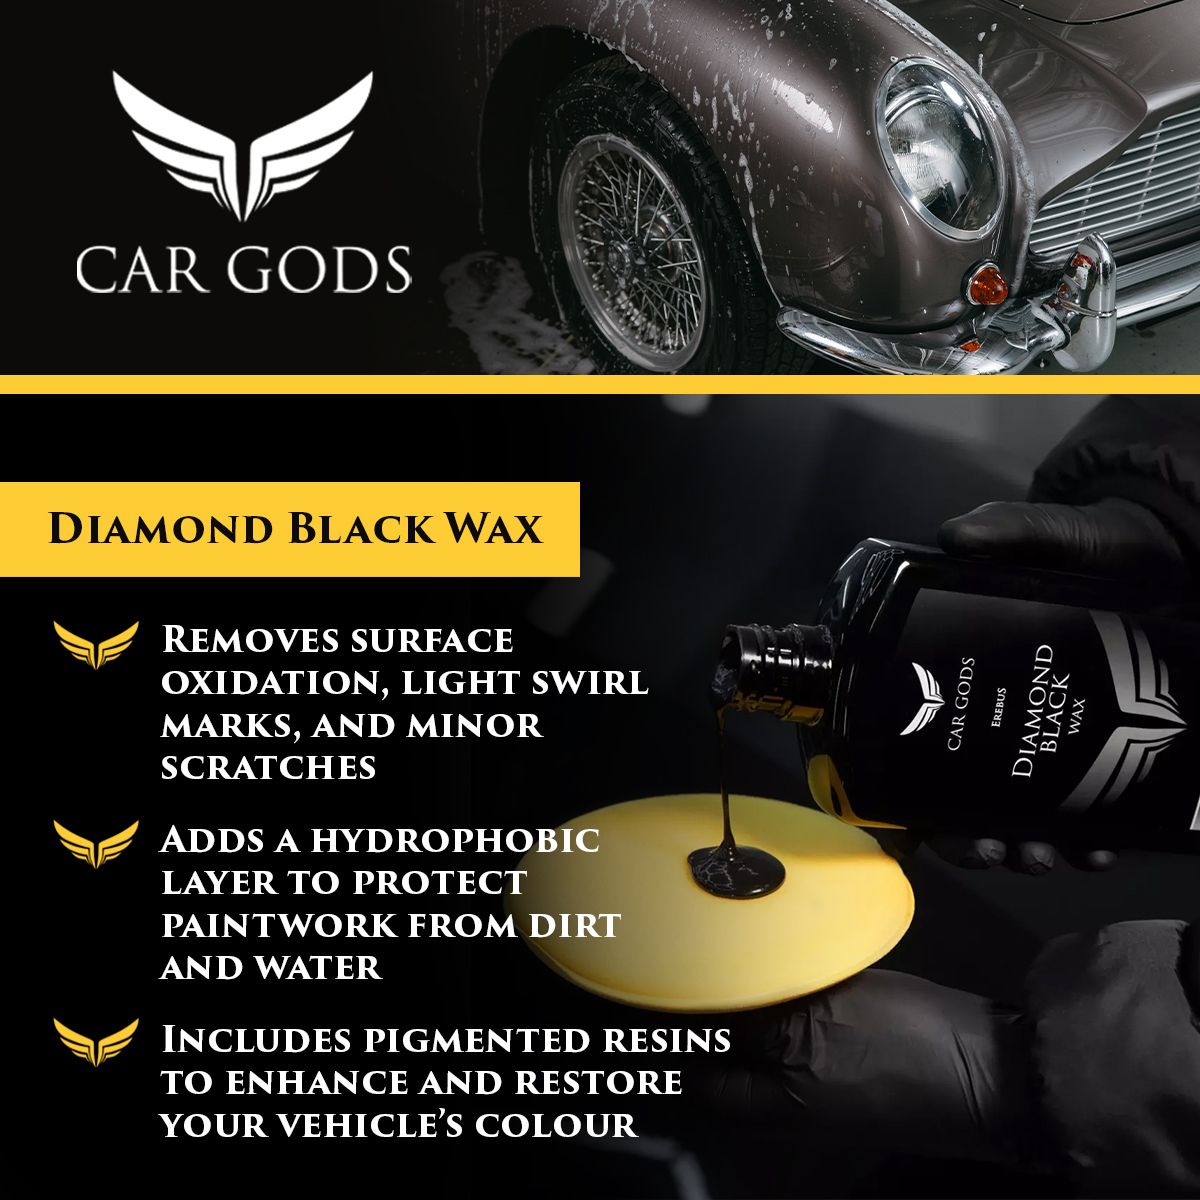 Car Gods Diamond Black Wax. Wax and polish in one, easy application with pigmented resins to enhance and restore your vehicle’s colour by removing surface oxidation, light swirl marks, and minor scratches. Plus, add a hydrophobic layer to protect paintwork from dirt and water.